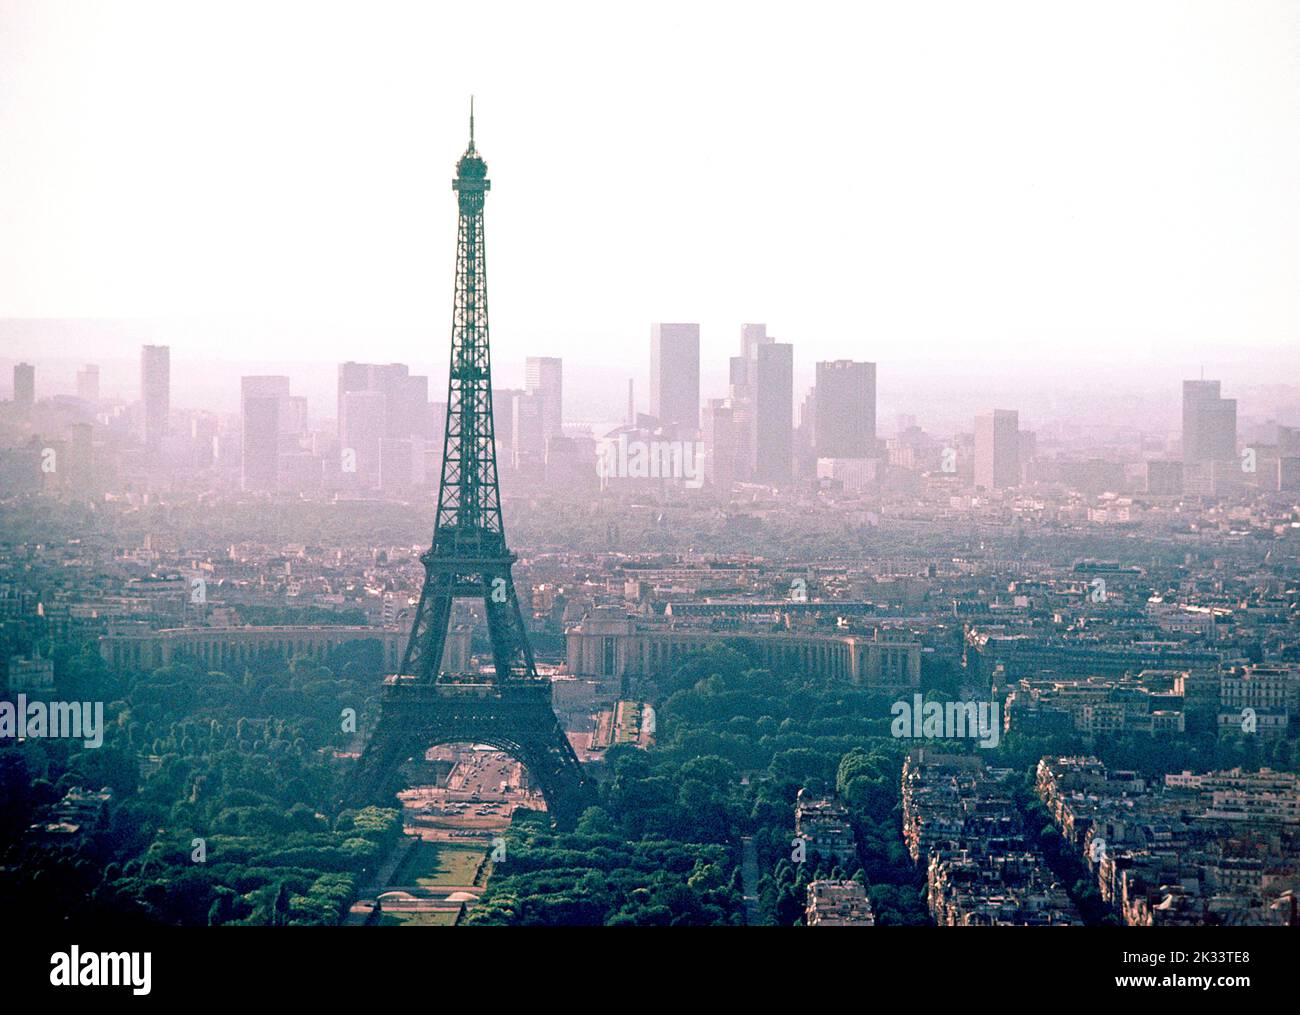 Europe. France. Paris. Eiffel Tower and view of city. Stock Photo